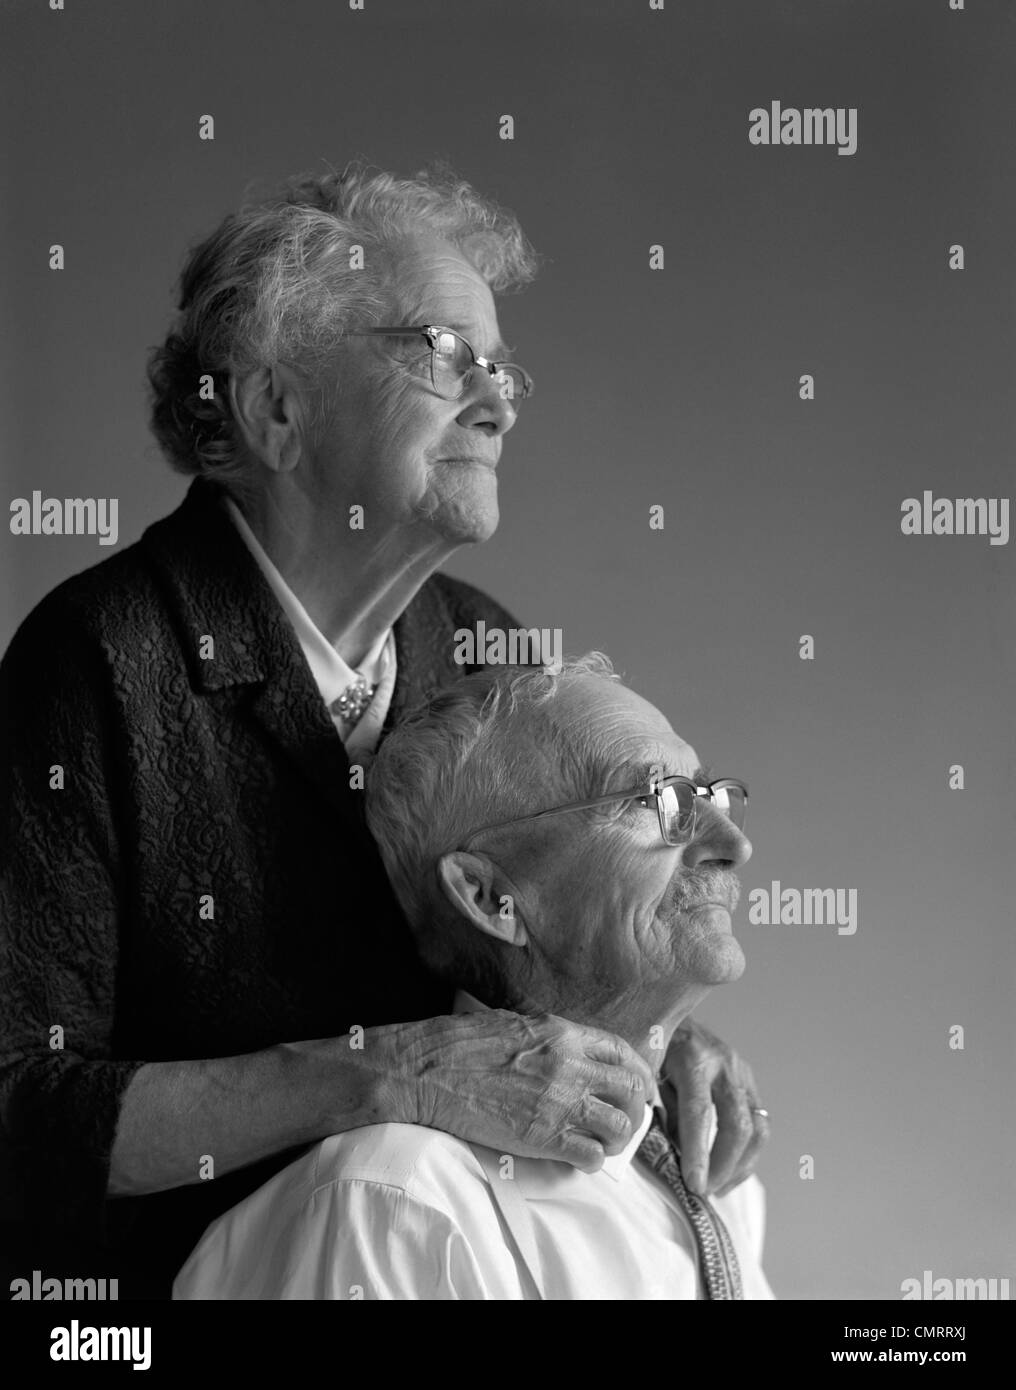 1960s PORTRAIT OF ELDERLY COUPLE IN THEIR 80s TIME WORN HANDS TOUCHING STUDIO Stock Photo